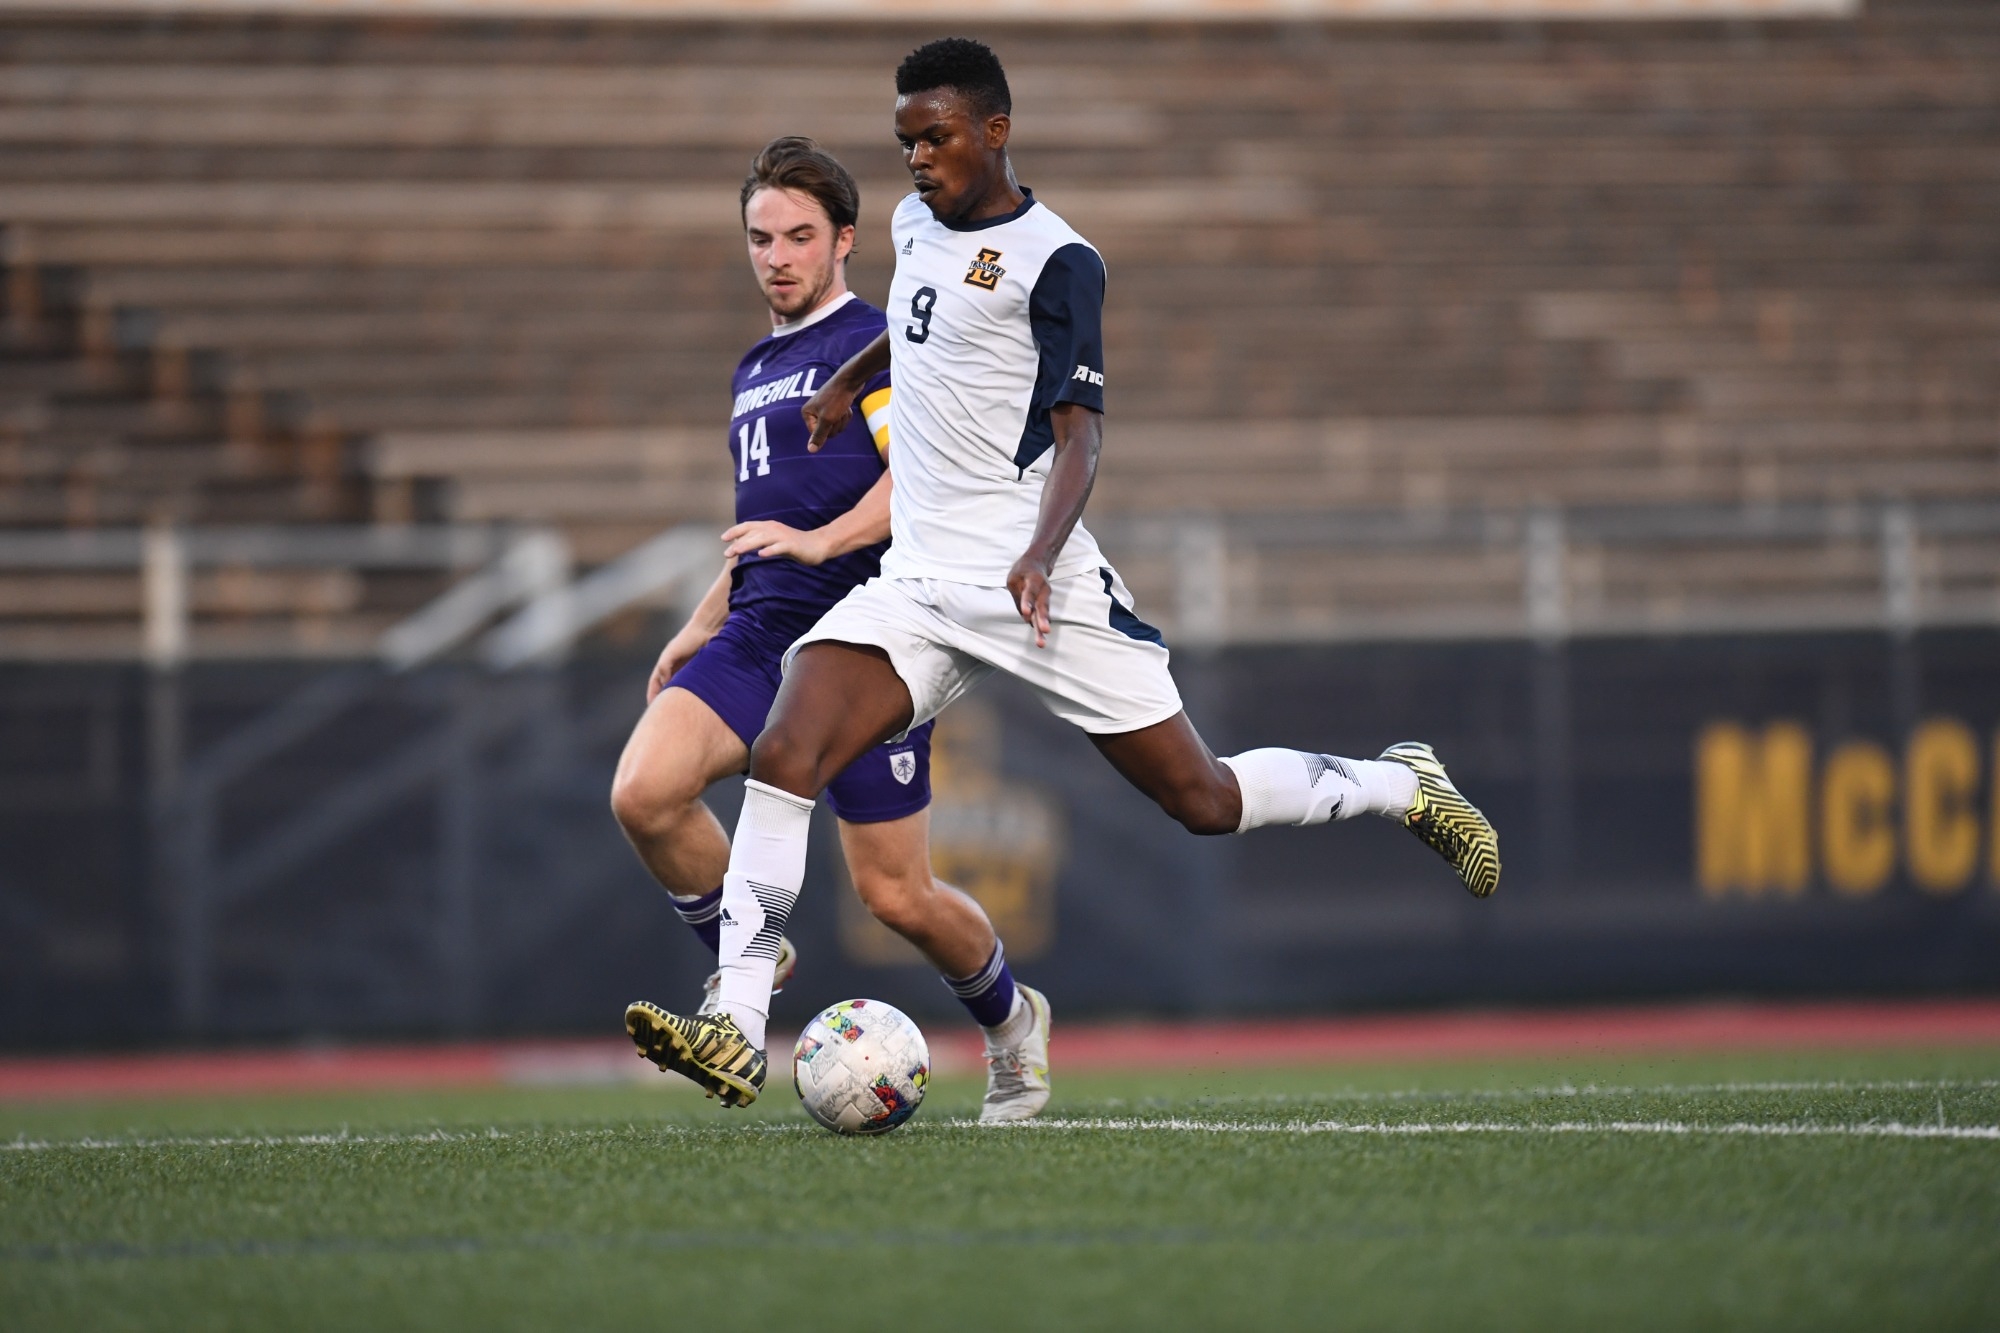 Men's Soccer St. Francis will travel to Brooklyn for the first road game of the 2022 season